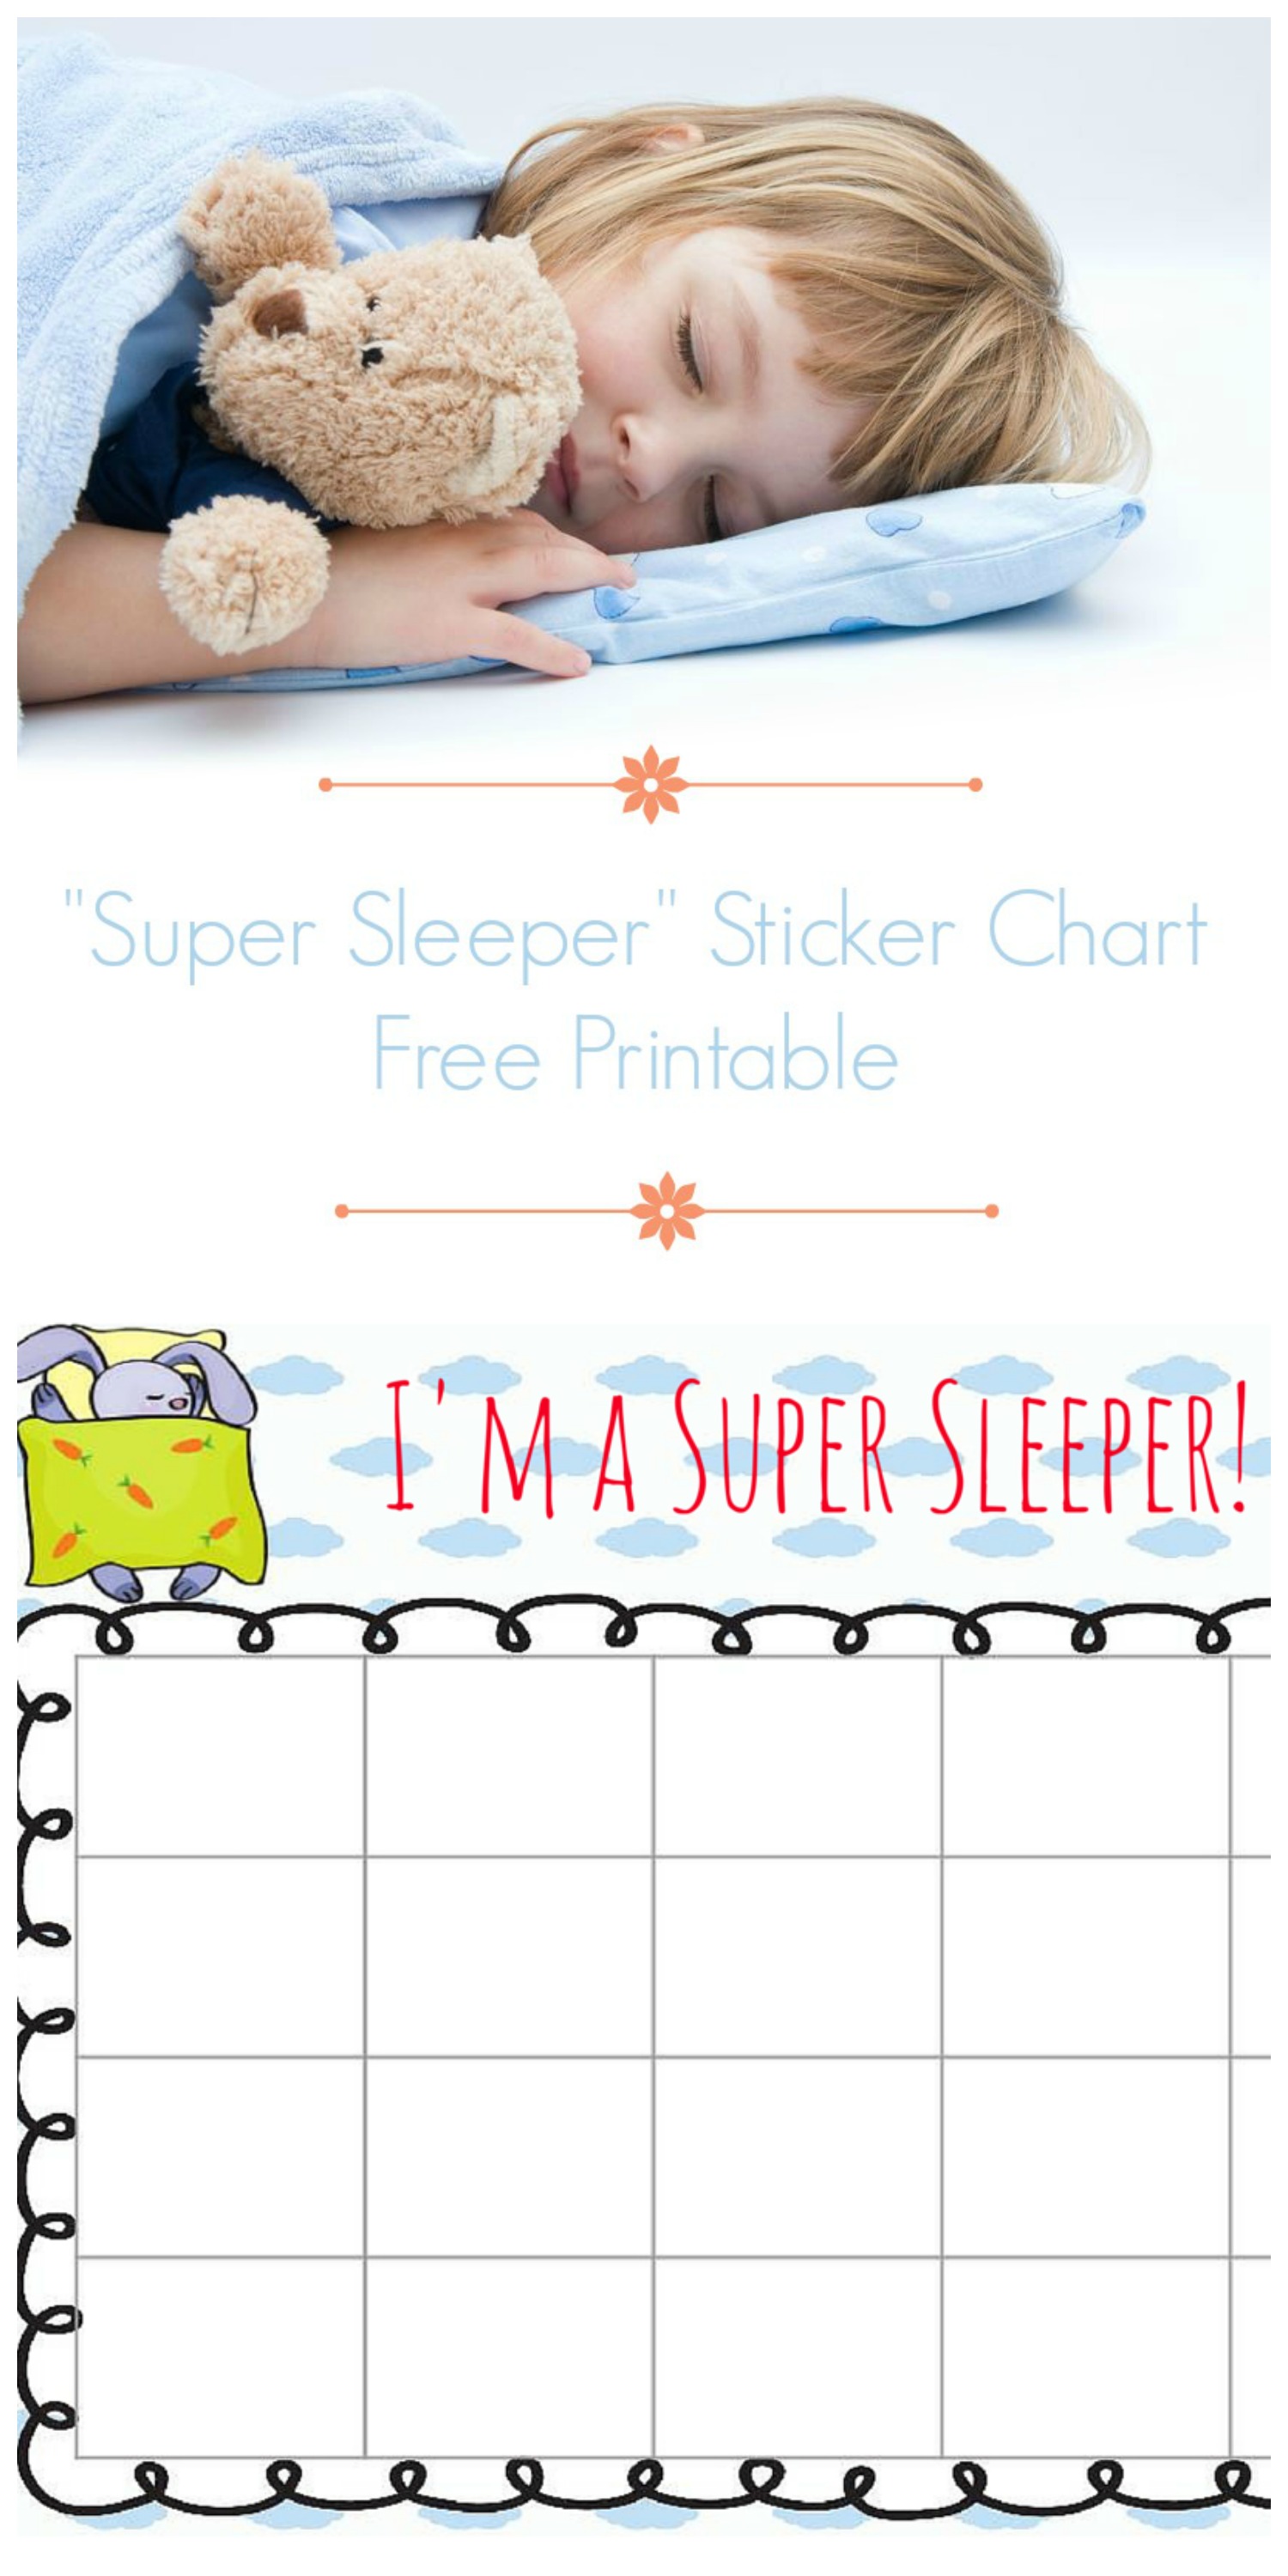 Kids Bedroom A5 Children’s Bedtime Reward Chart with Smiley Face Stickers 